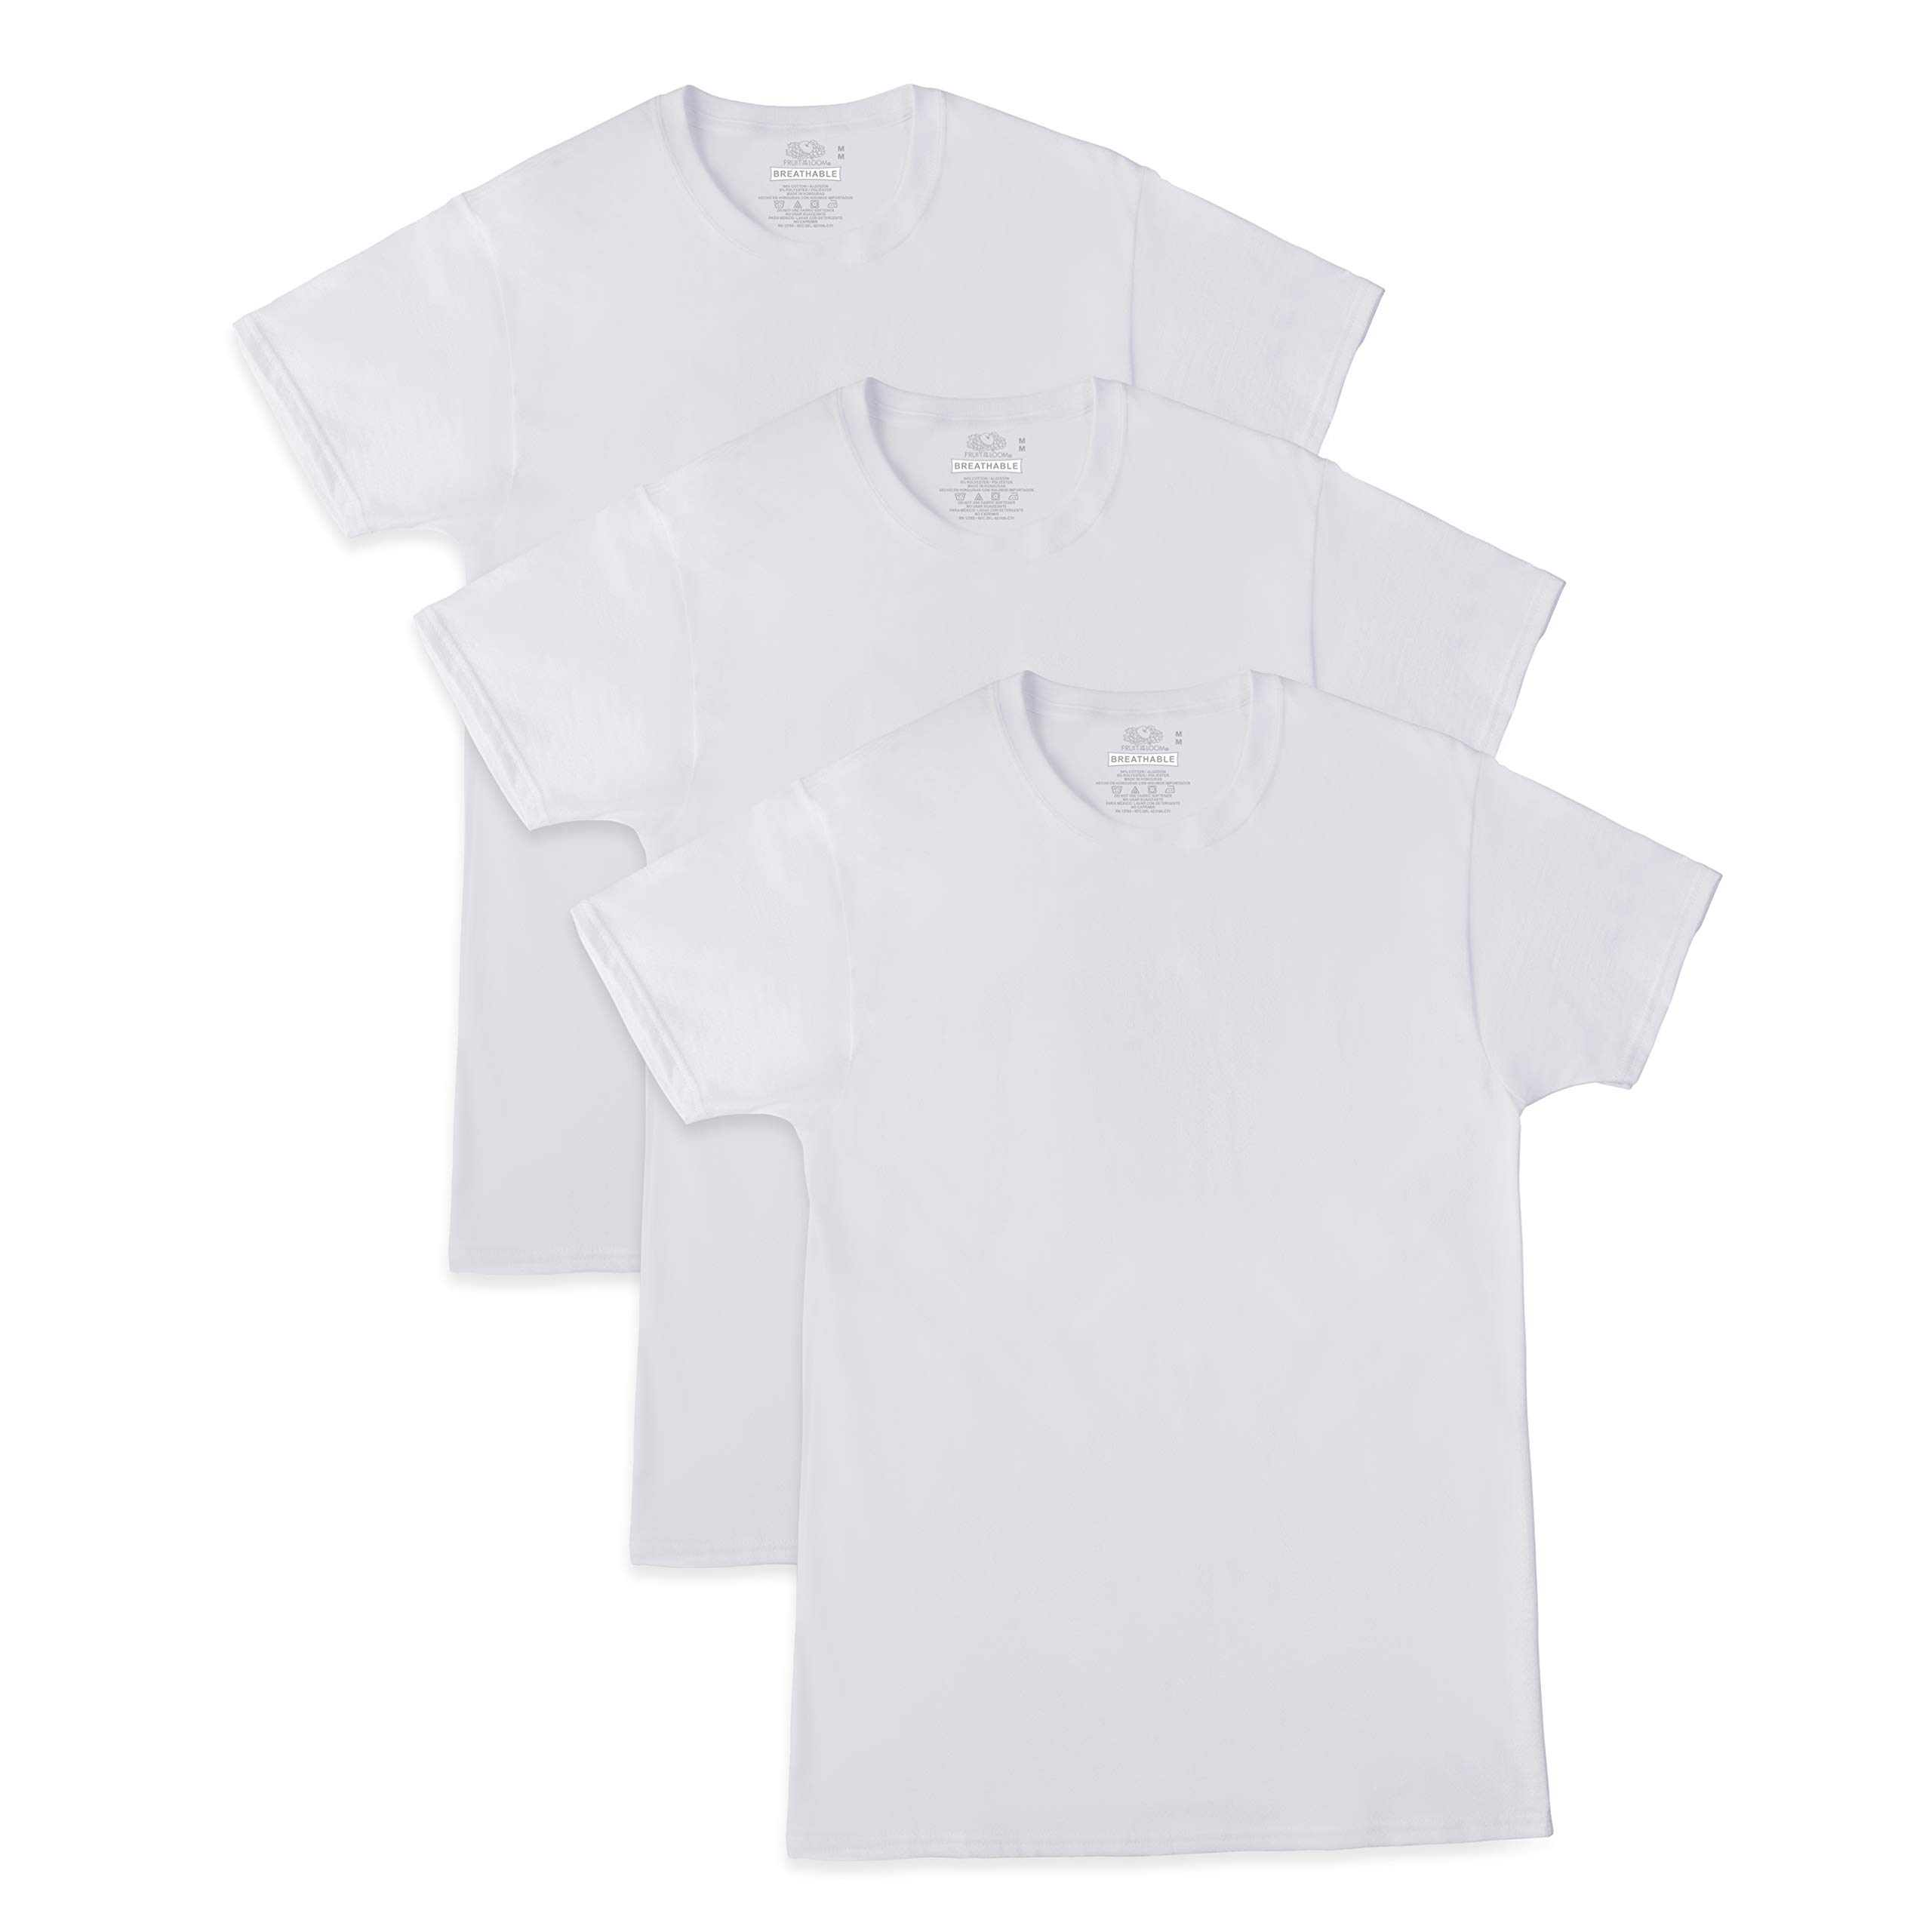 Fruit of the Loom Men's Breathable Undershirts, Designed to Keep You Cool